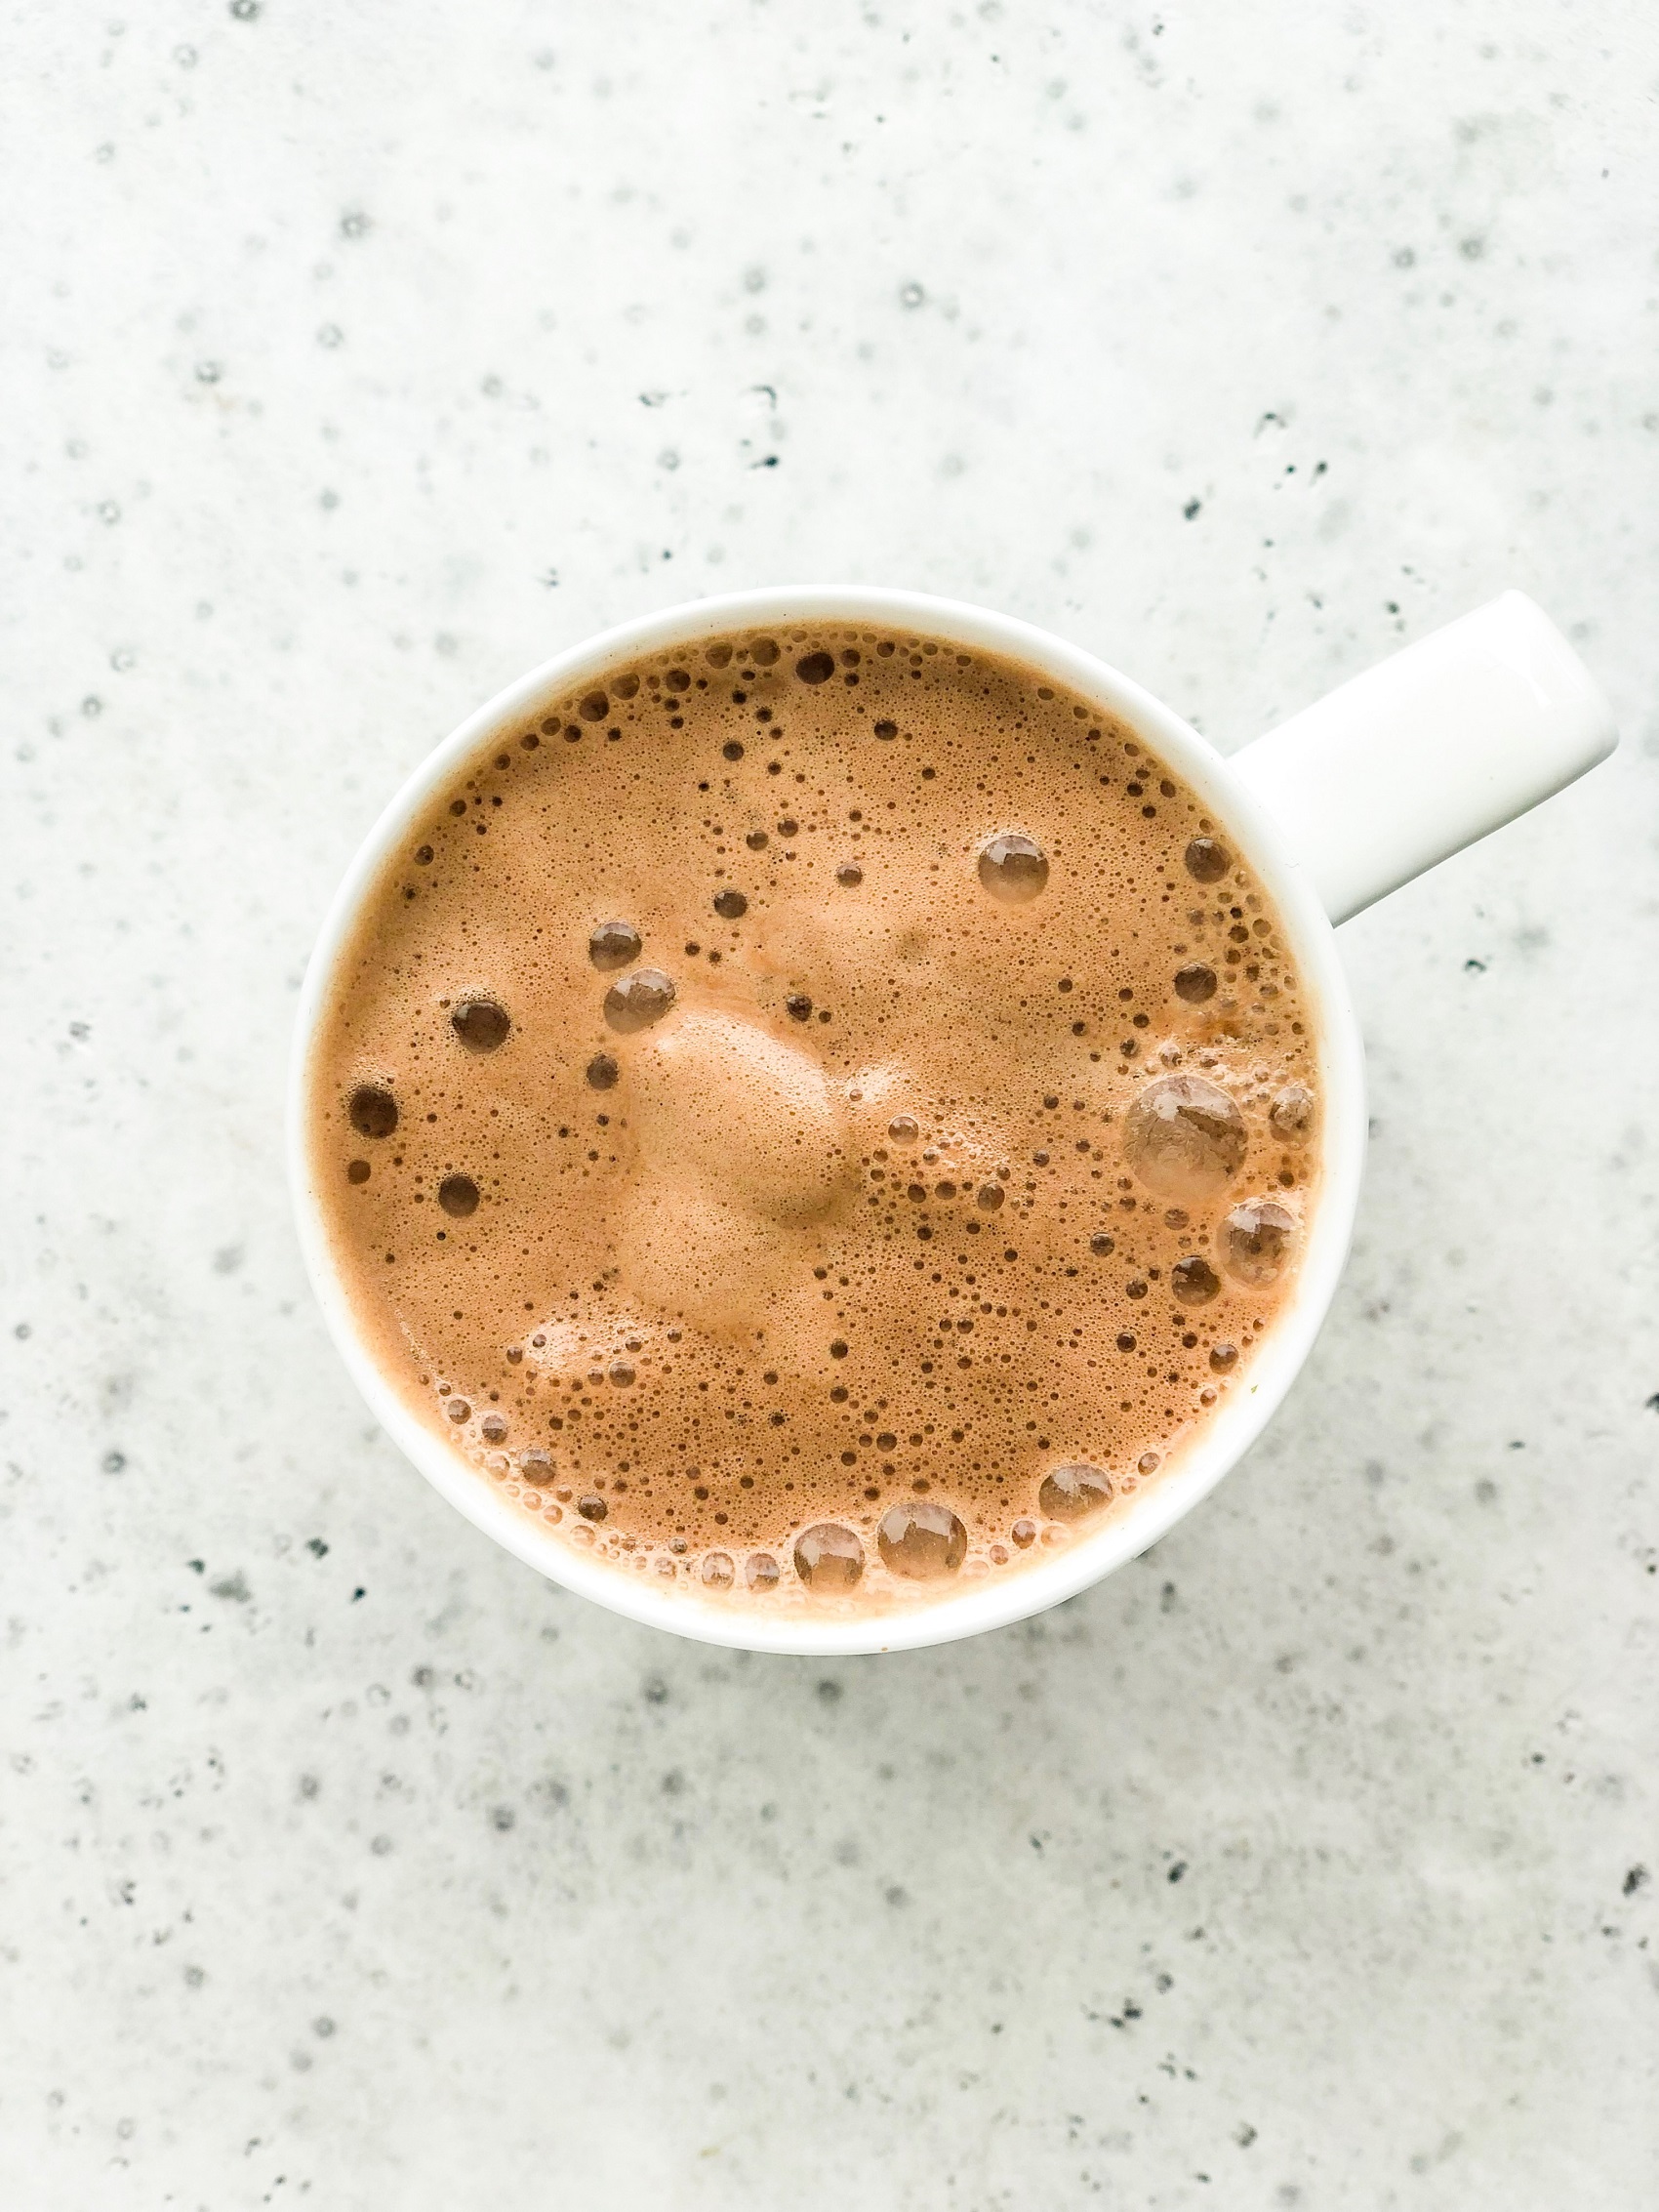 Easy Vegan Hot Chocolate | Living Well With Nic